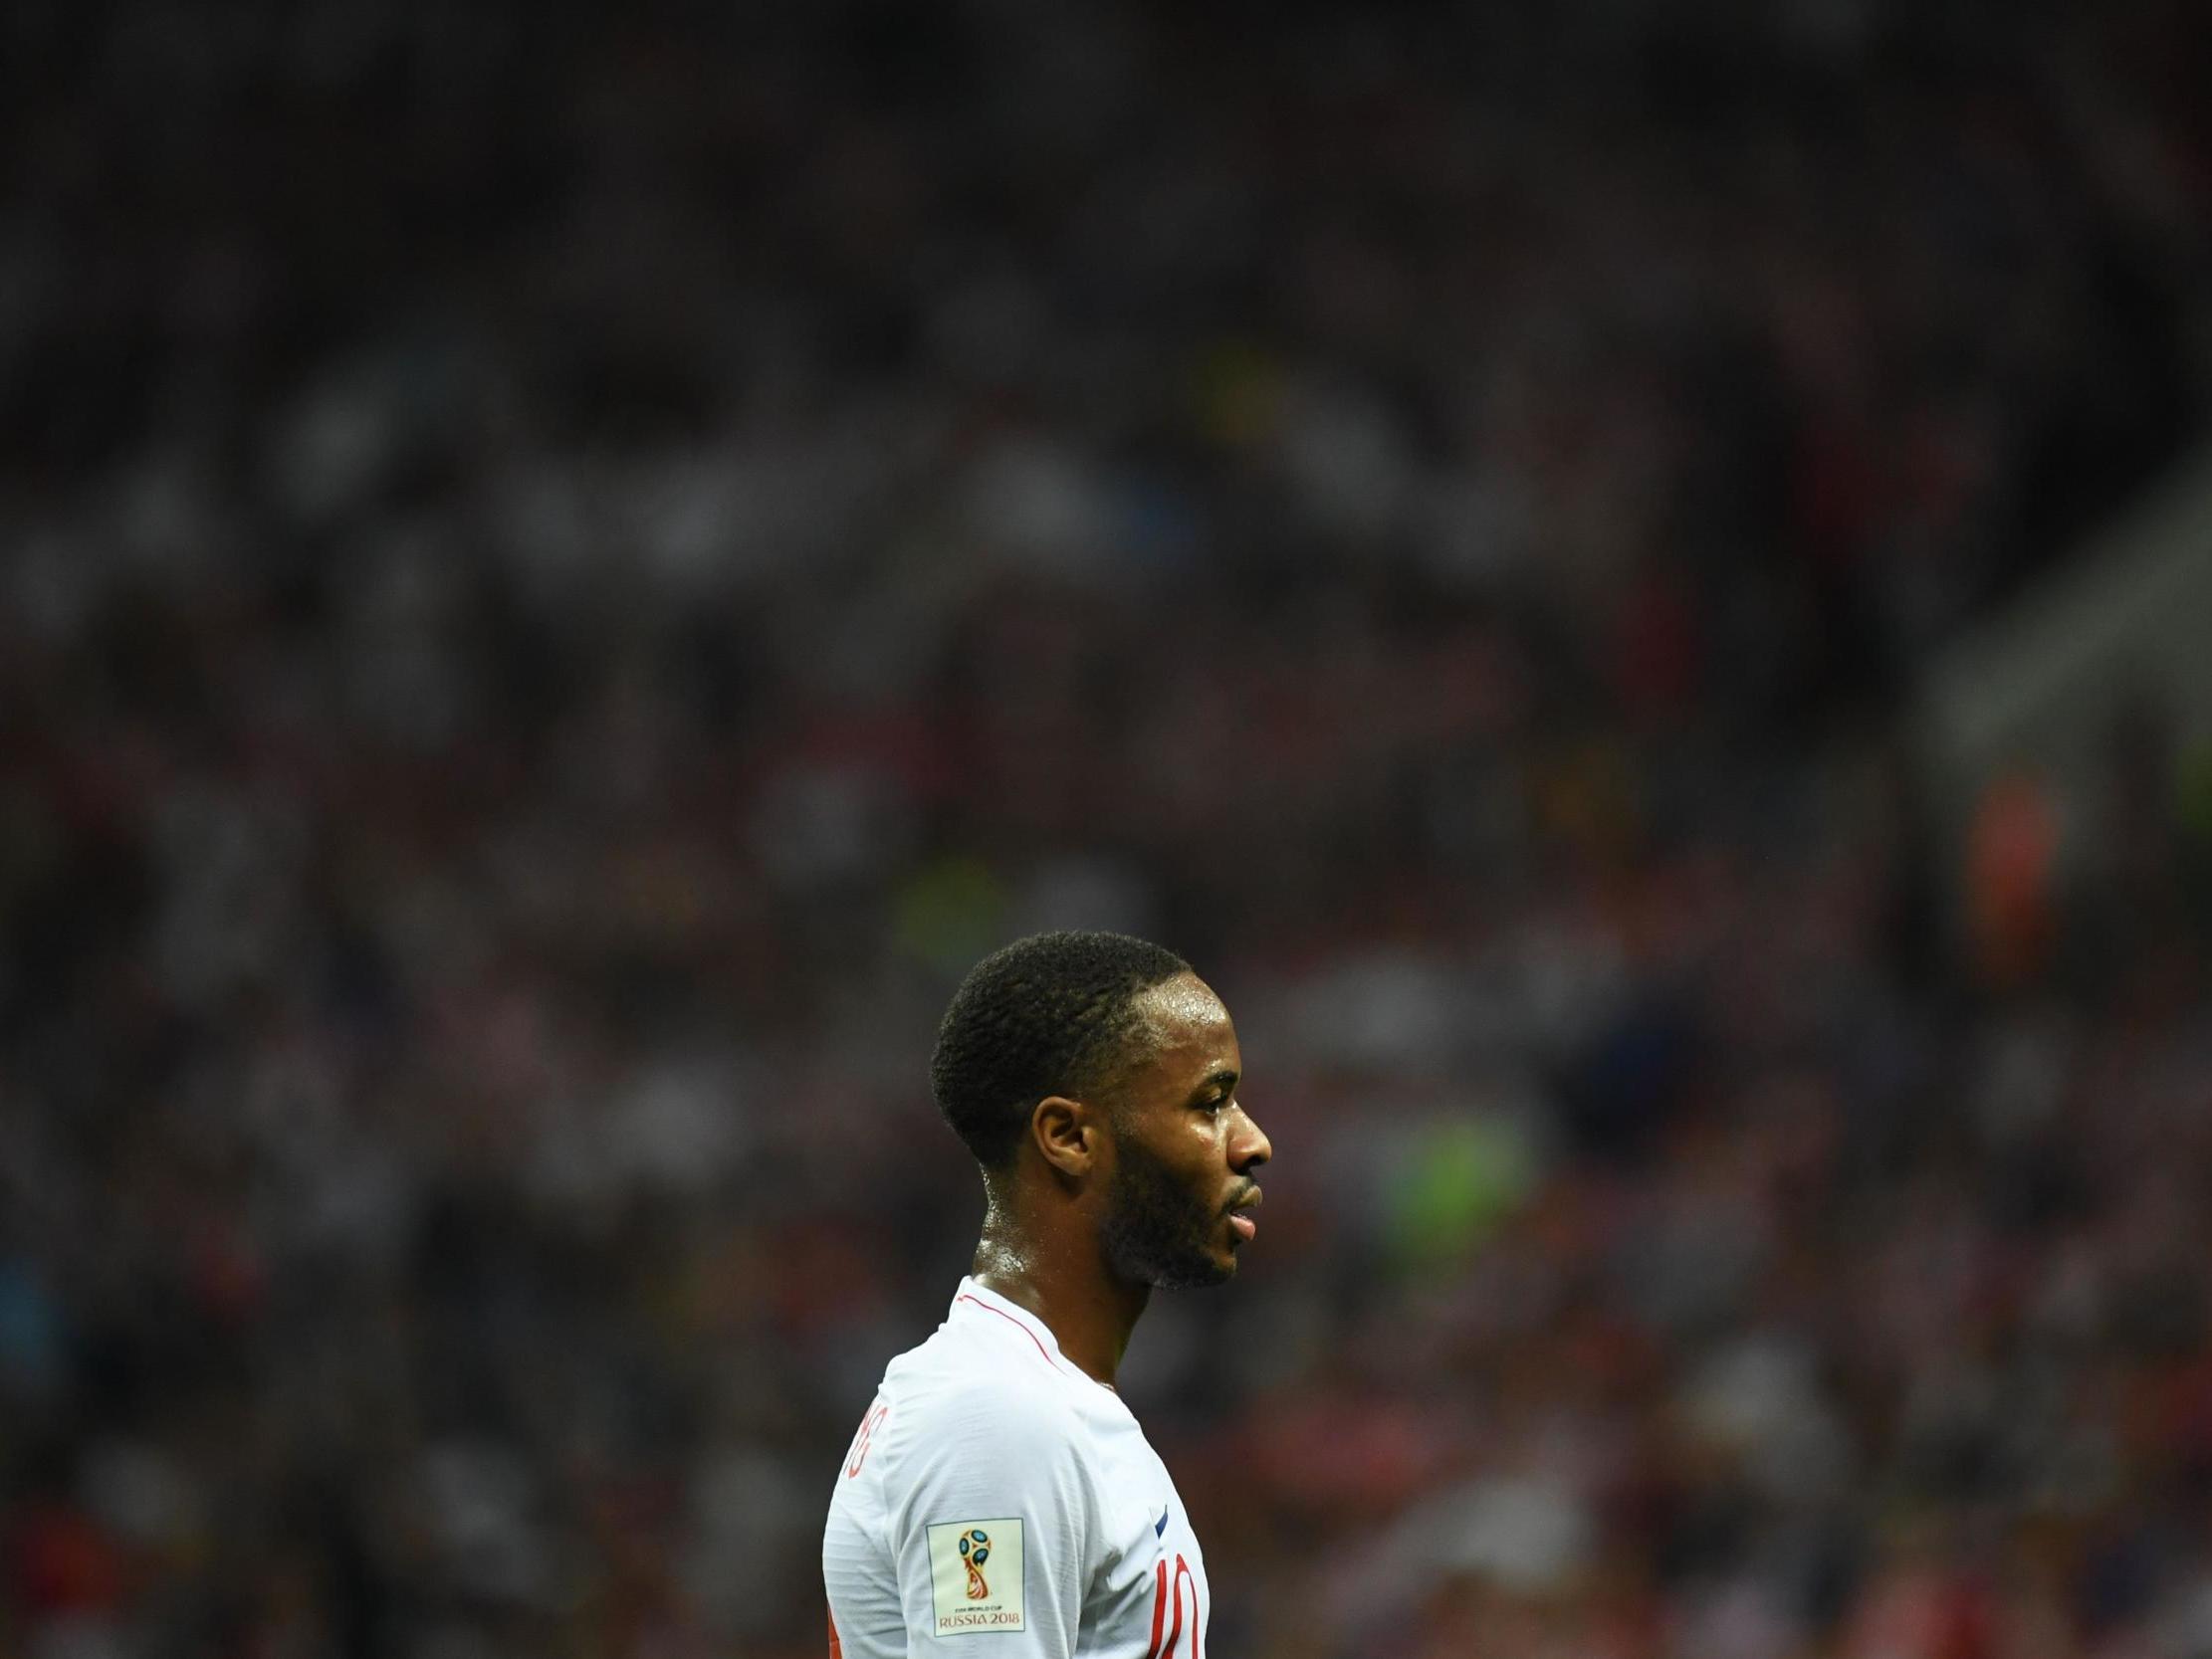 Too often, Raheem Sterling seems like the most expendable part of Gareth Southgate’s side